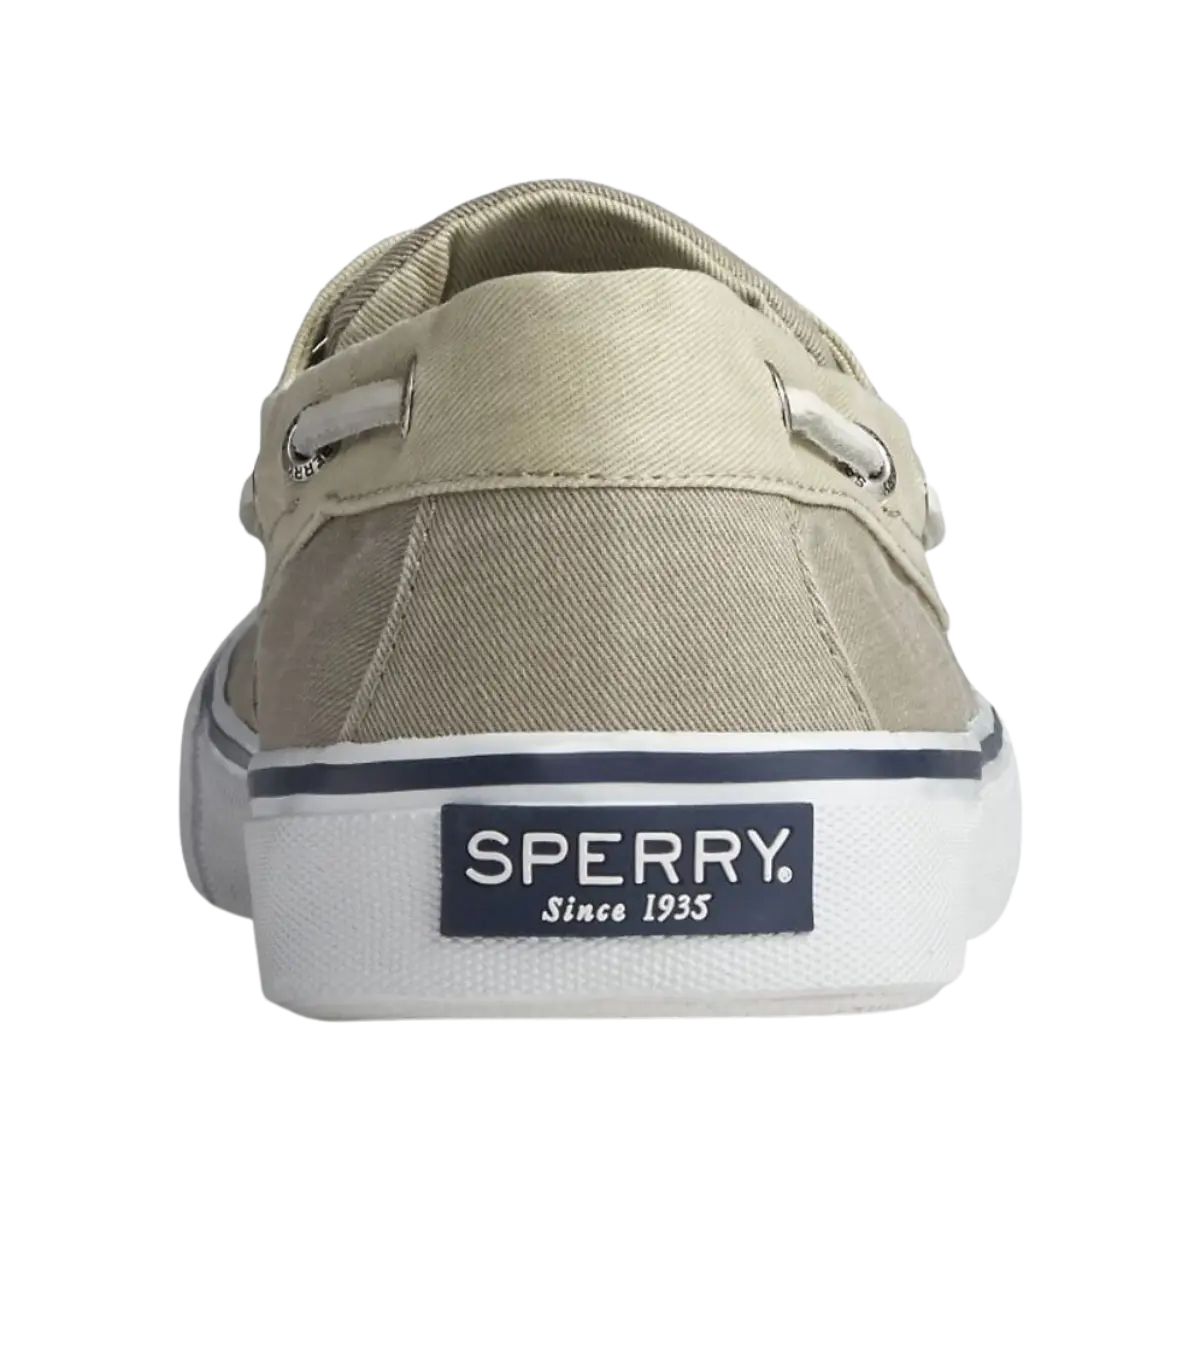 Global Pursuit, Sperry